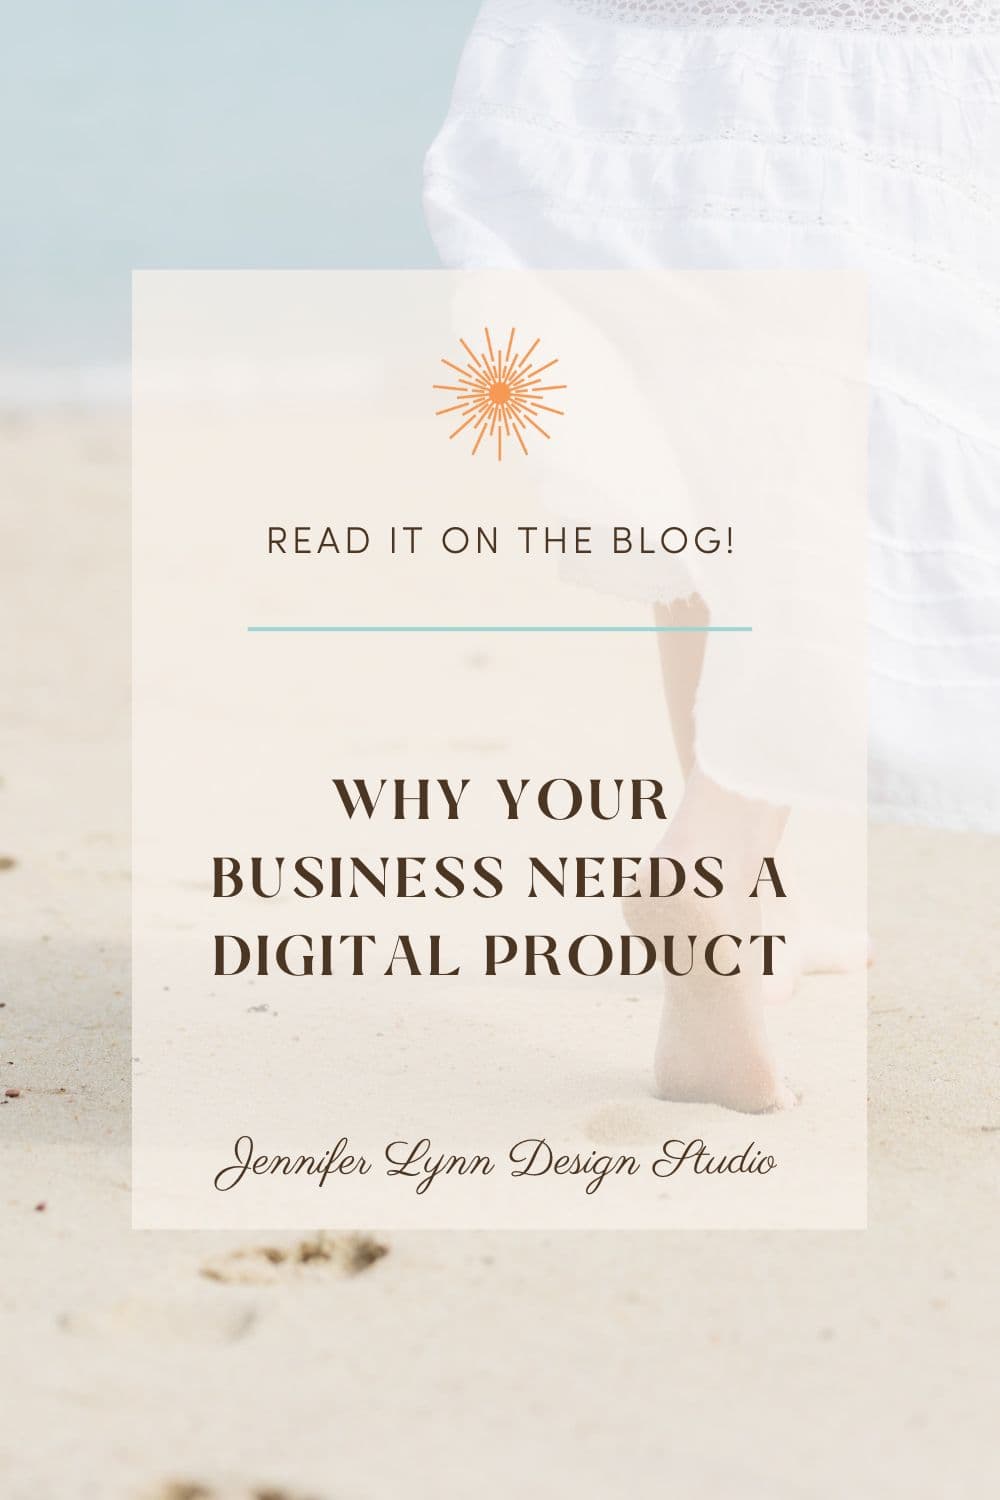 Why Your Business Needs a Digital Product by Jennifer Lynn Design Studio